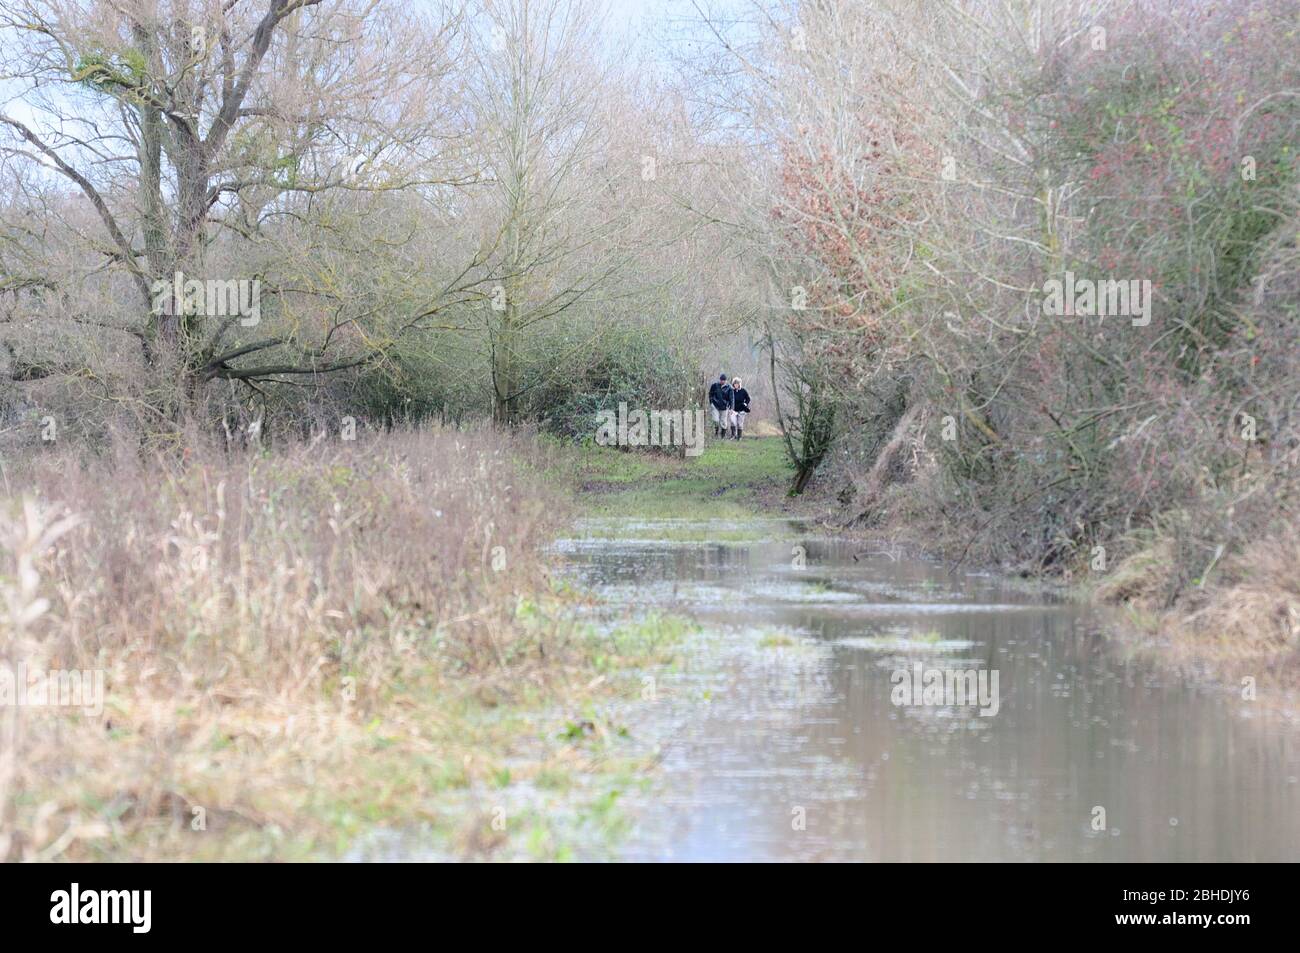 People are walking on public footpath during flooding Stock Photo